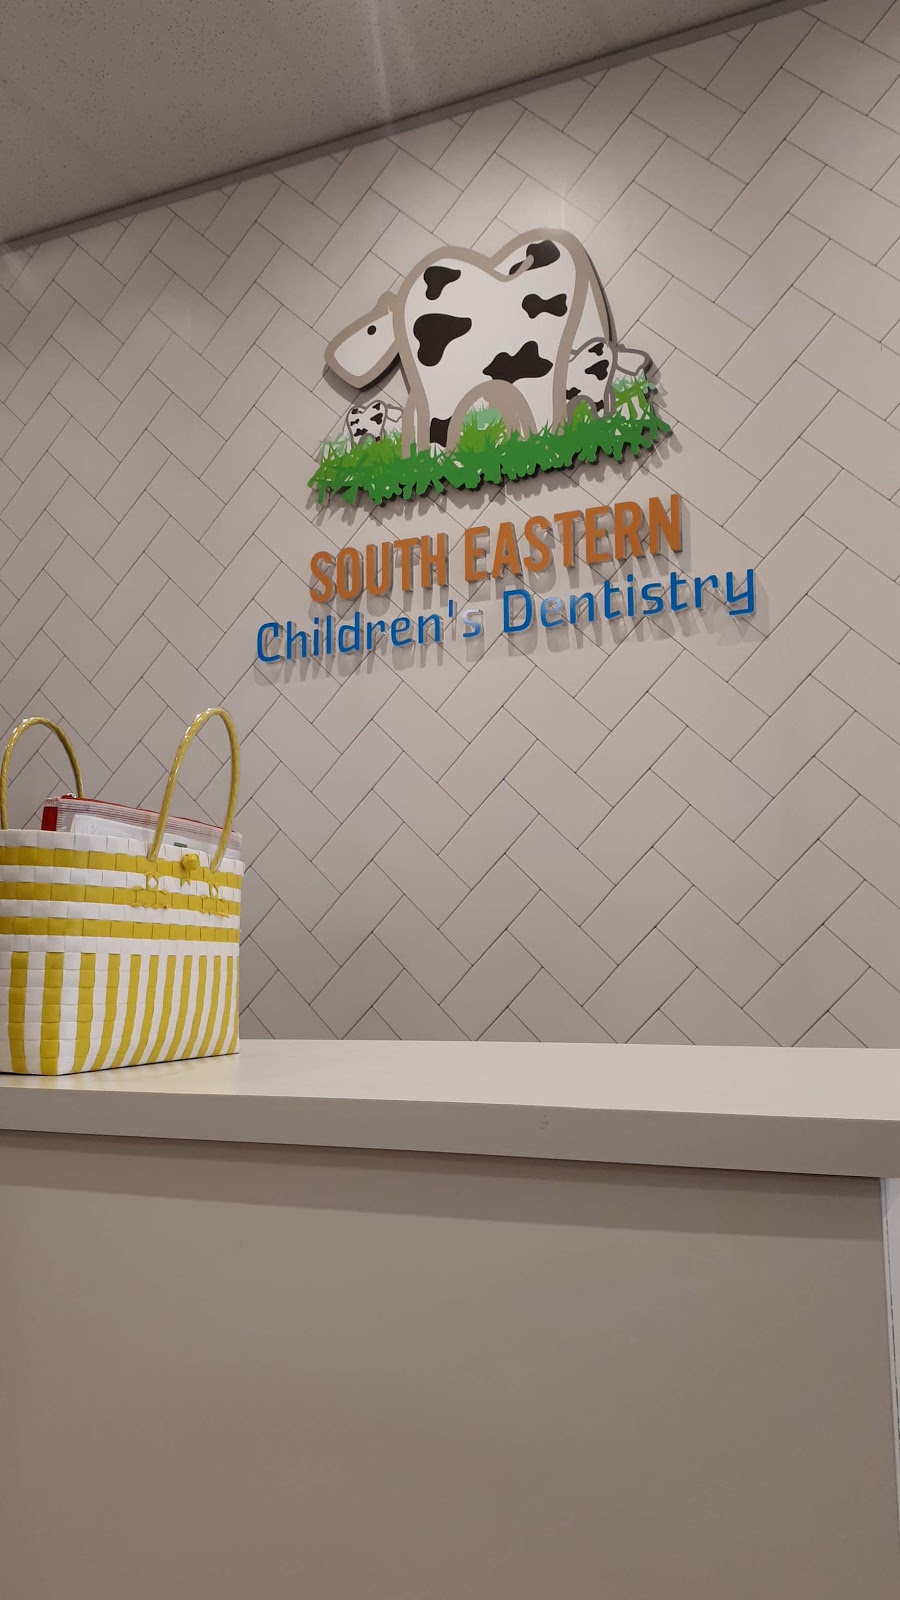 South Eastern Childrens Dentistry | dentist | 6/645 - 647 Burwood Hwy, Vermont South VIC 3133, Australia | 0434938935 OR +61 434 938 935